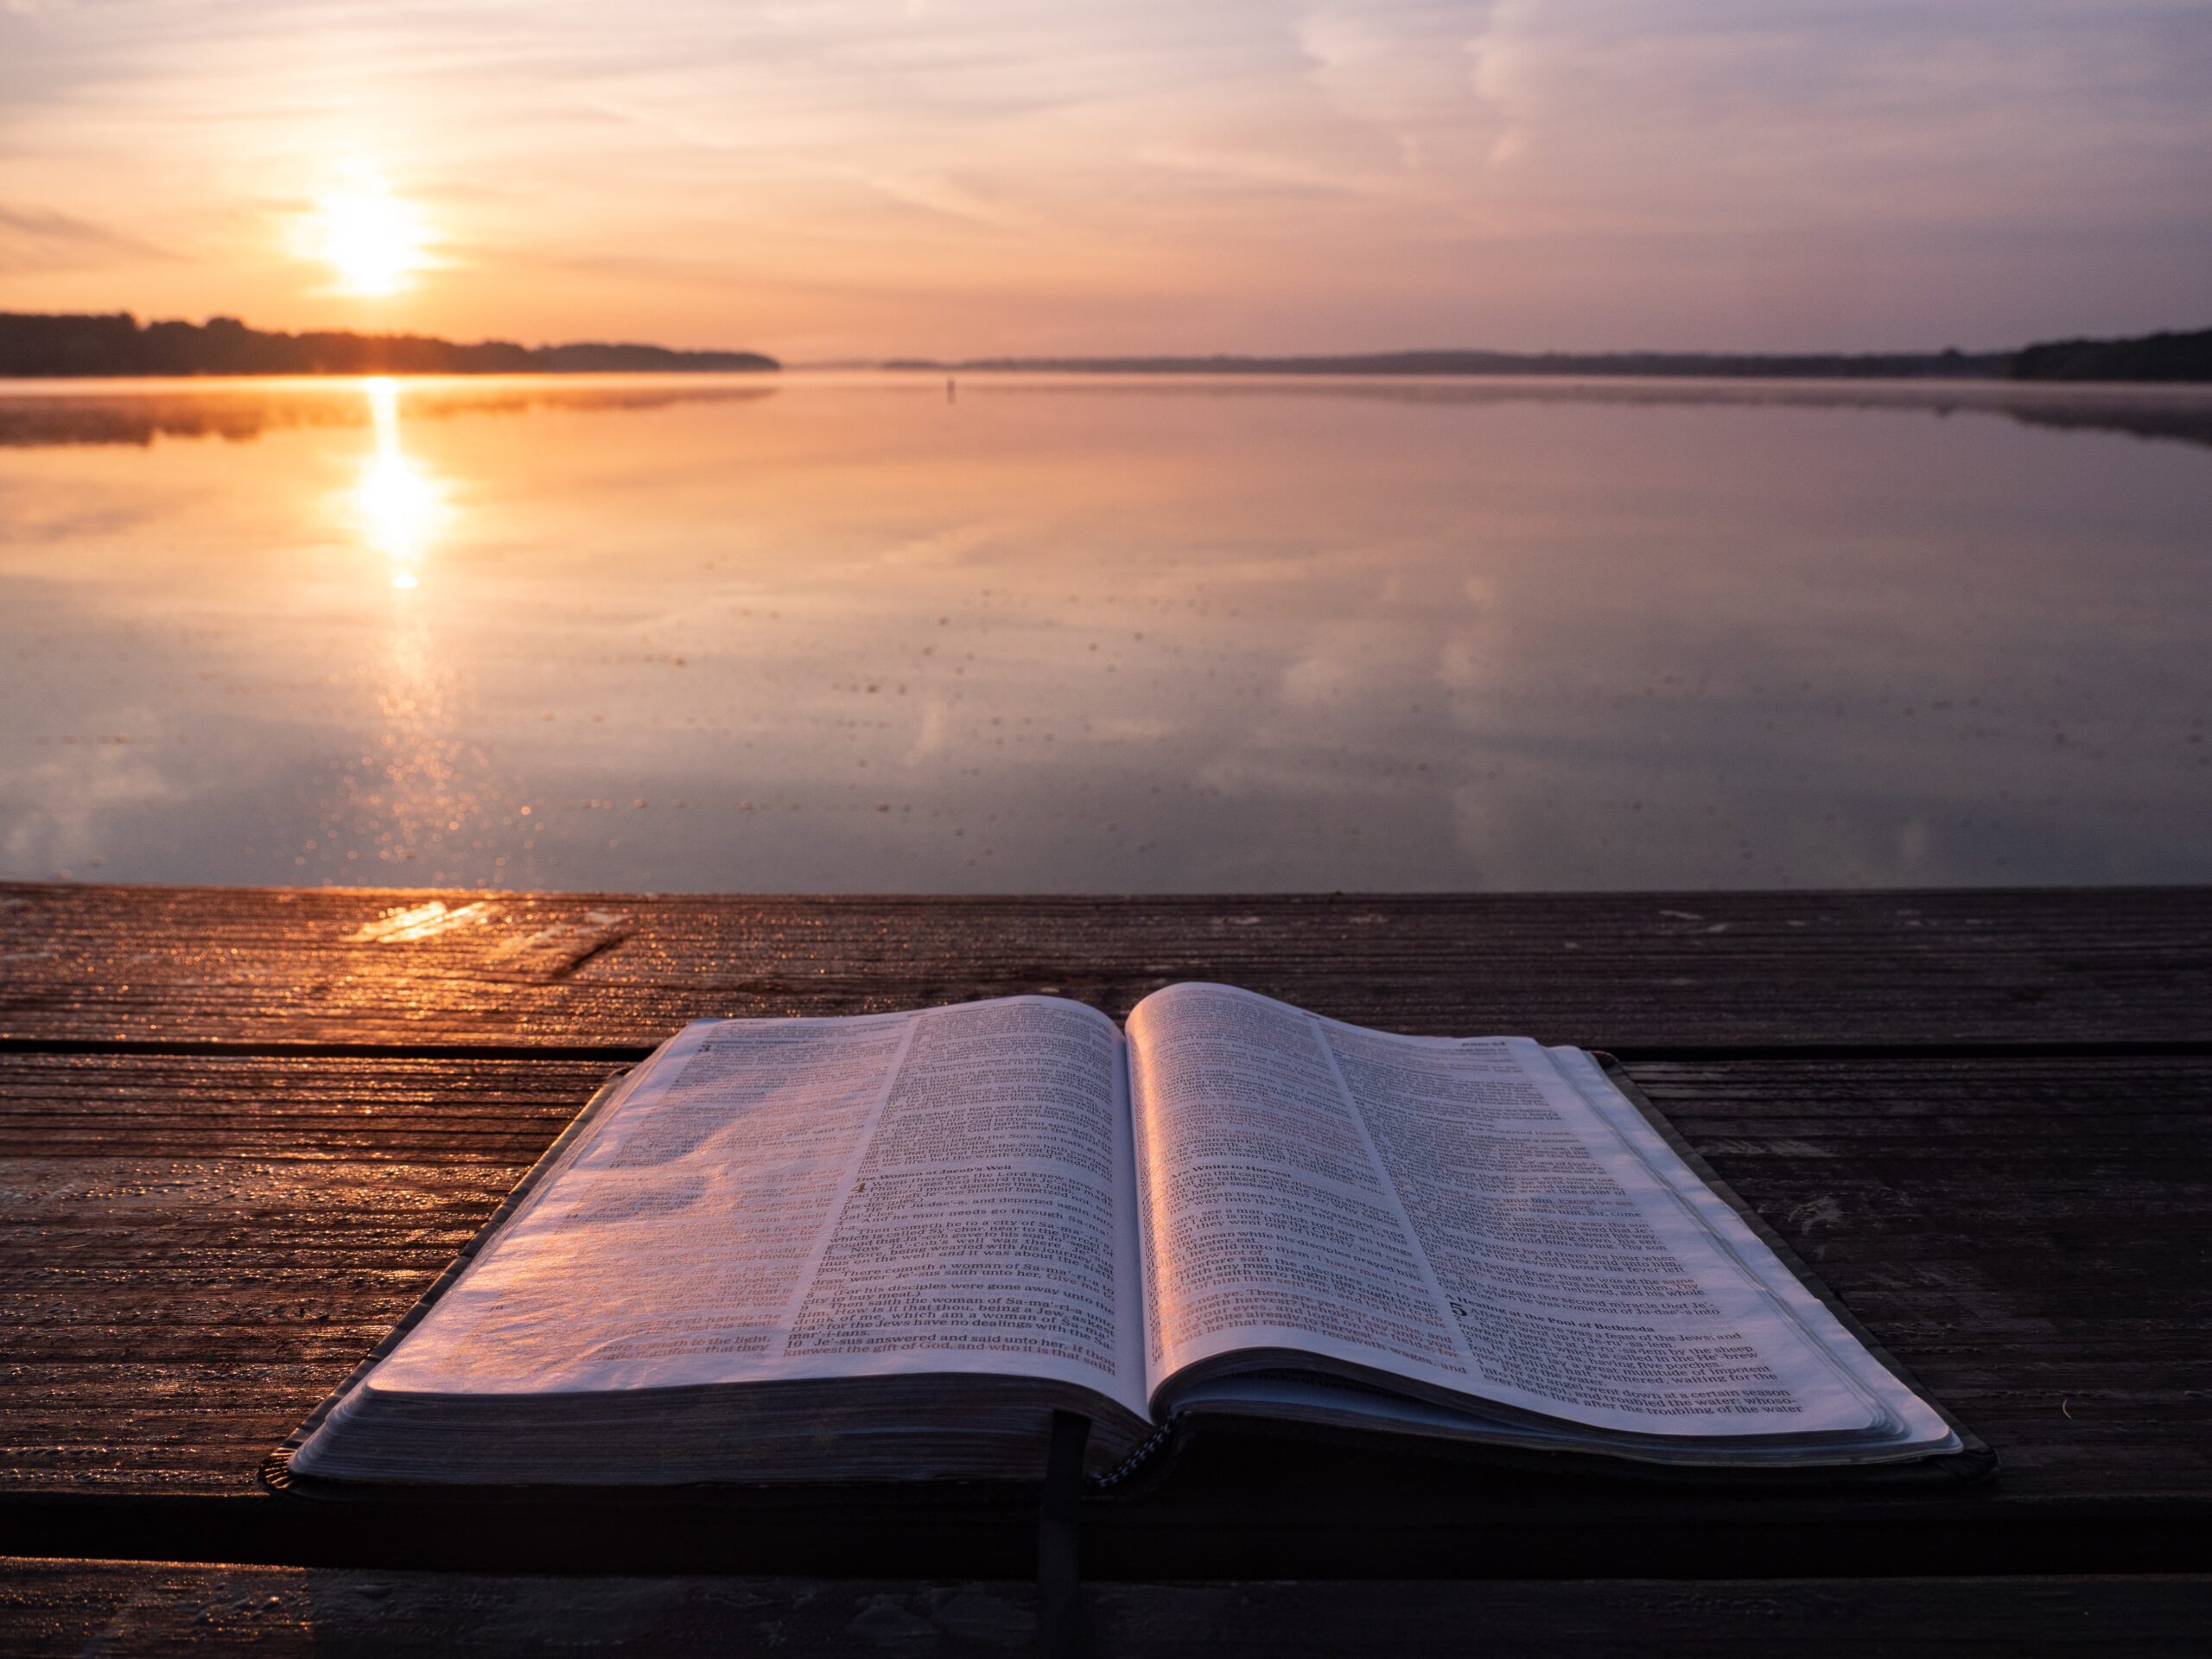 Struggling to Read the Bible? Here are 5 Practical Ways to Ignite Your Love for the Bible.